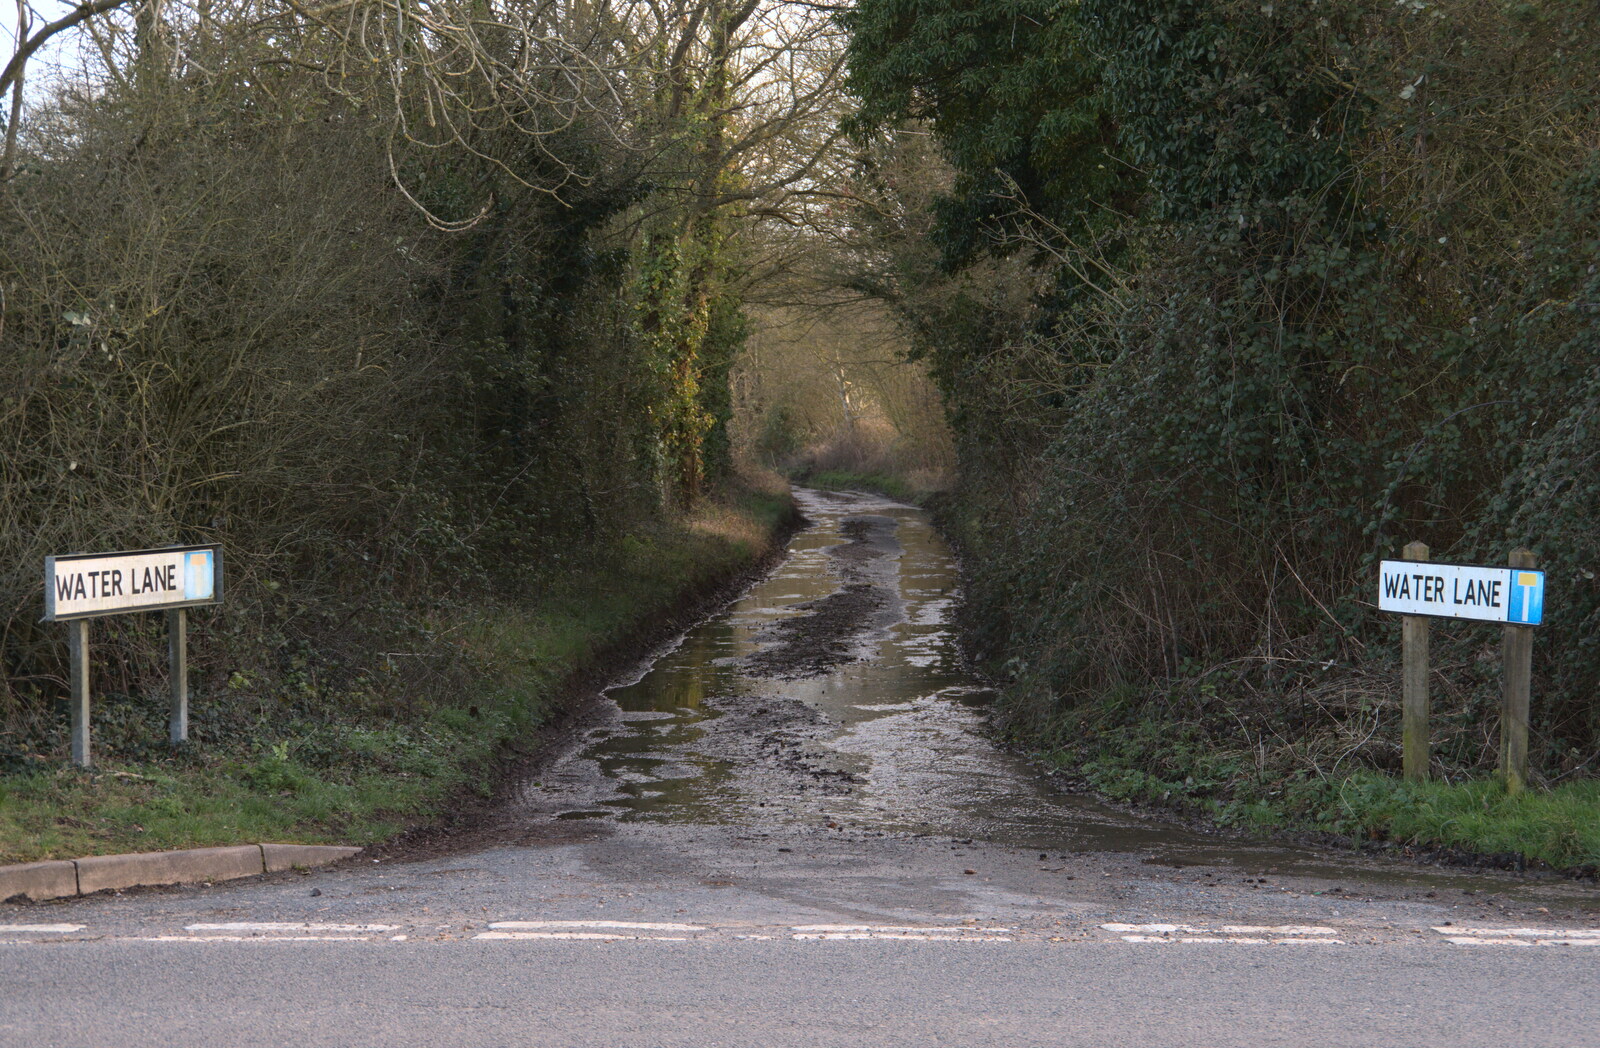 Water Lane really lives up to its name from Sunday Lunch and a SwiftKey Trip to Nando's, Thornham and Bayswater - 22nd February 2020